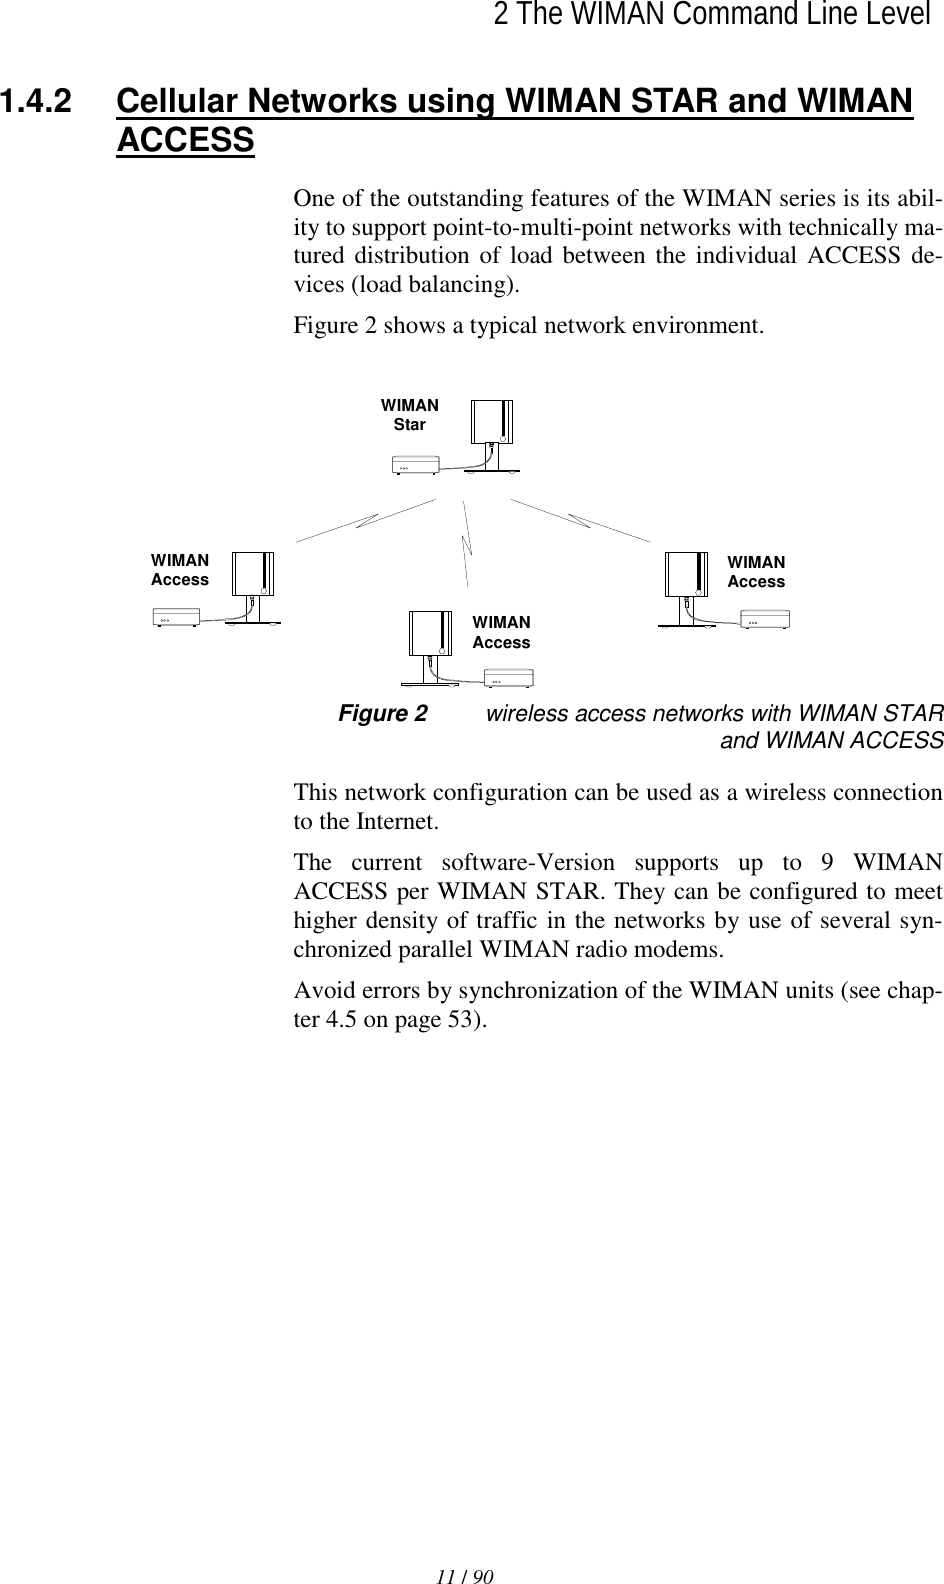   2 The WIMAN Command Line Level11 / 90l1.4.2  Cellular Networks using WIMAN STAR and WIMAN ACCESS One of the outstanding features of the WIMAN series is its abil-ity to support point-to-multi-point networks with technically ma-tured distribution of load between the individual ACCESS de-vices (load balancing). Figure 2 shows a typical network environment. WIMANAccessWIMANStarWIMANAccessWIMANAccess Figure 2  wireless access networks with WIMAN STAR and WIMAN ACCESS This network configuration can be used as a wireless connection to the Internet. The current software-Version supports up to 9 WIMAN ACCESS per WIMAN STAR. They can be configured to meet higher density of traffic in the networks by use of several syn-chronized parallel WIMAN radio modems. Avoid errors by synchronization of the WIMAN units (see chap-ter 4.5 on page 53). 